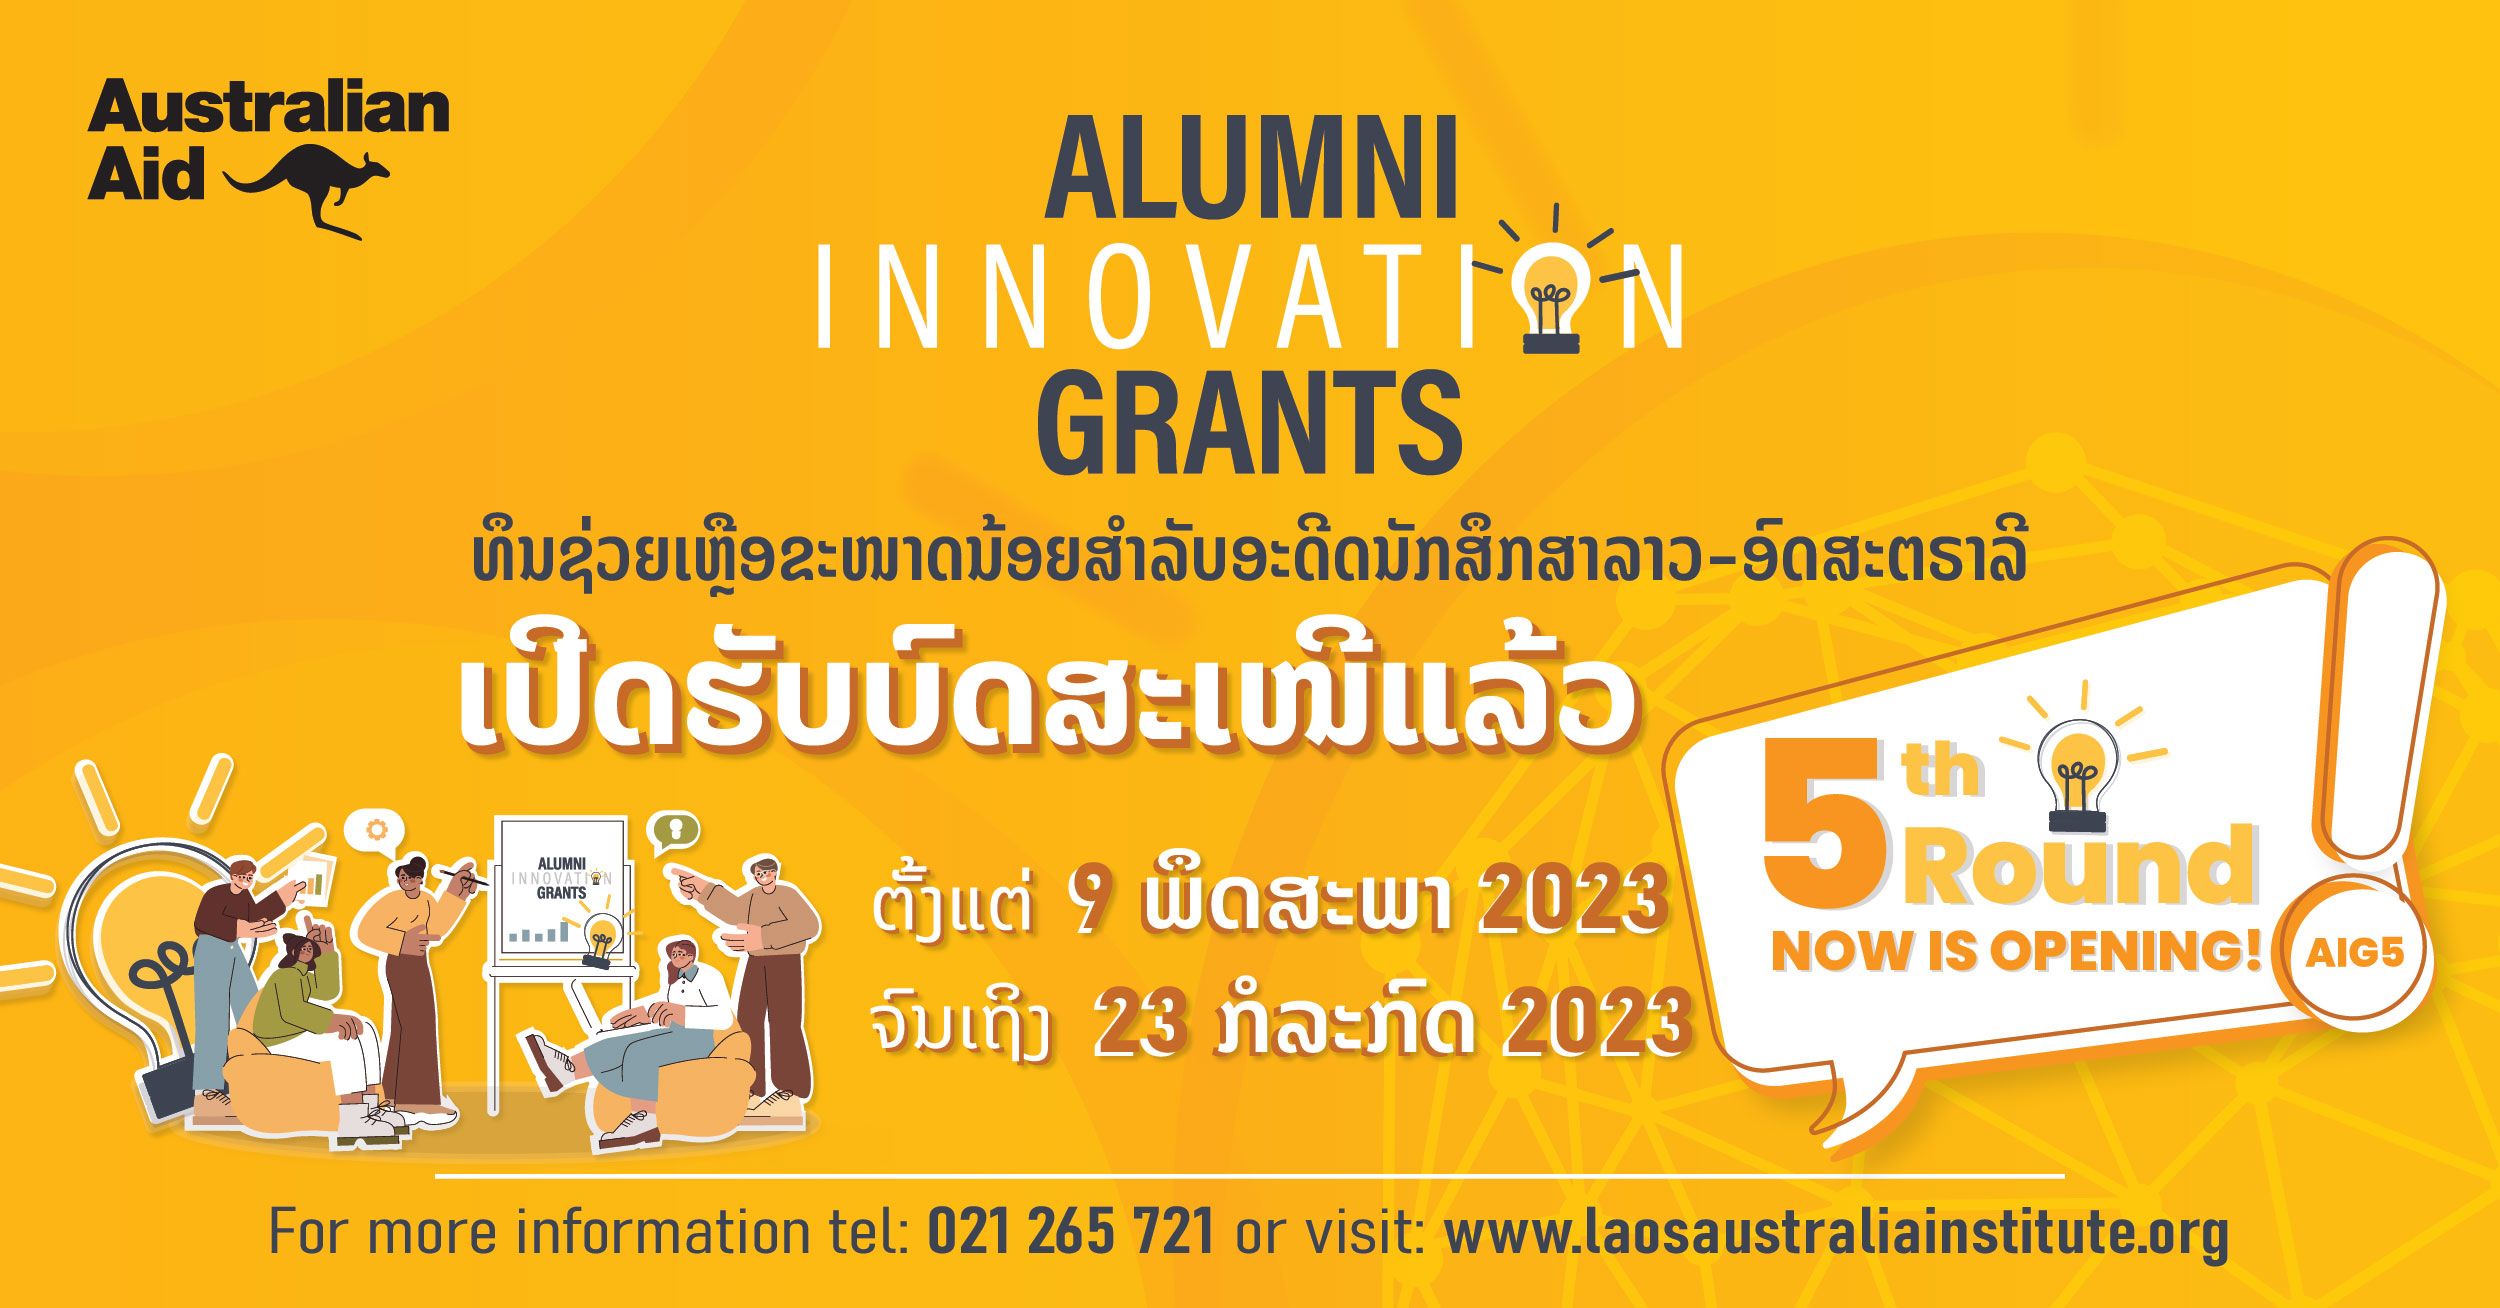 Applications are now open for round 5 of the Alumni Innovation Grants